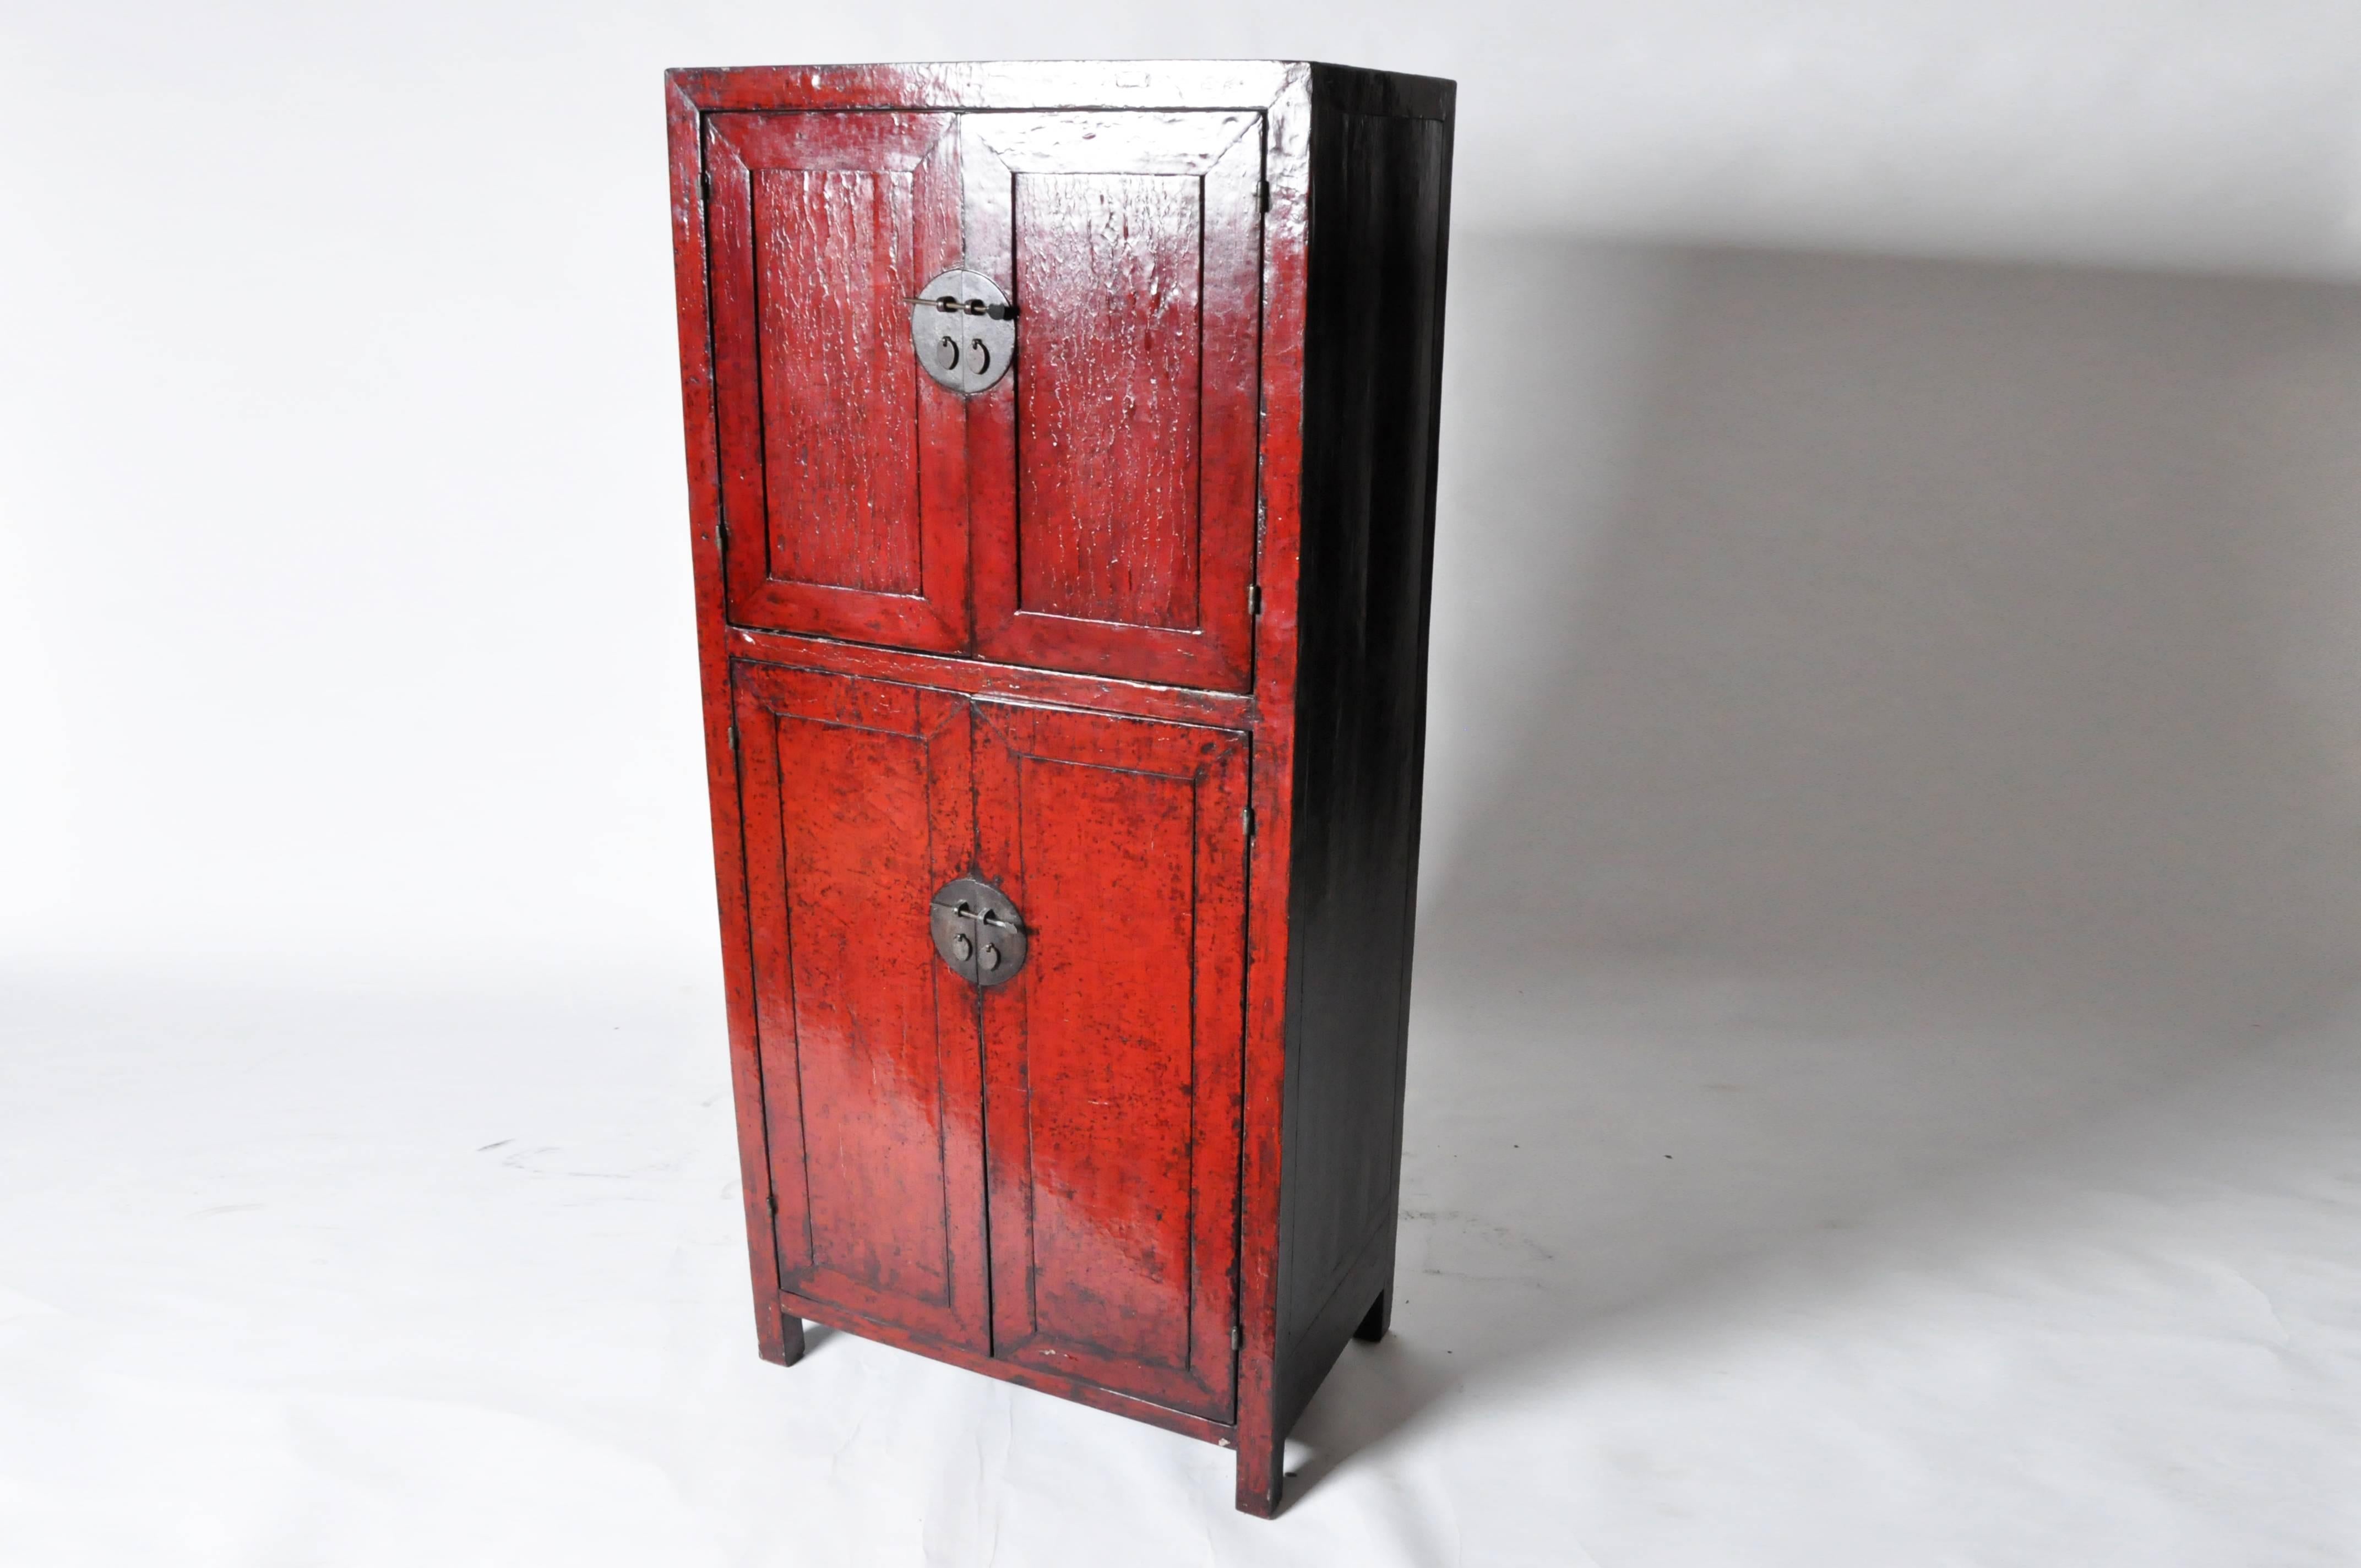 This red lacquered Chinese cabinet is made from elmwood. The piece features three shelves for storage.